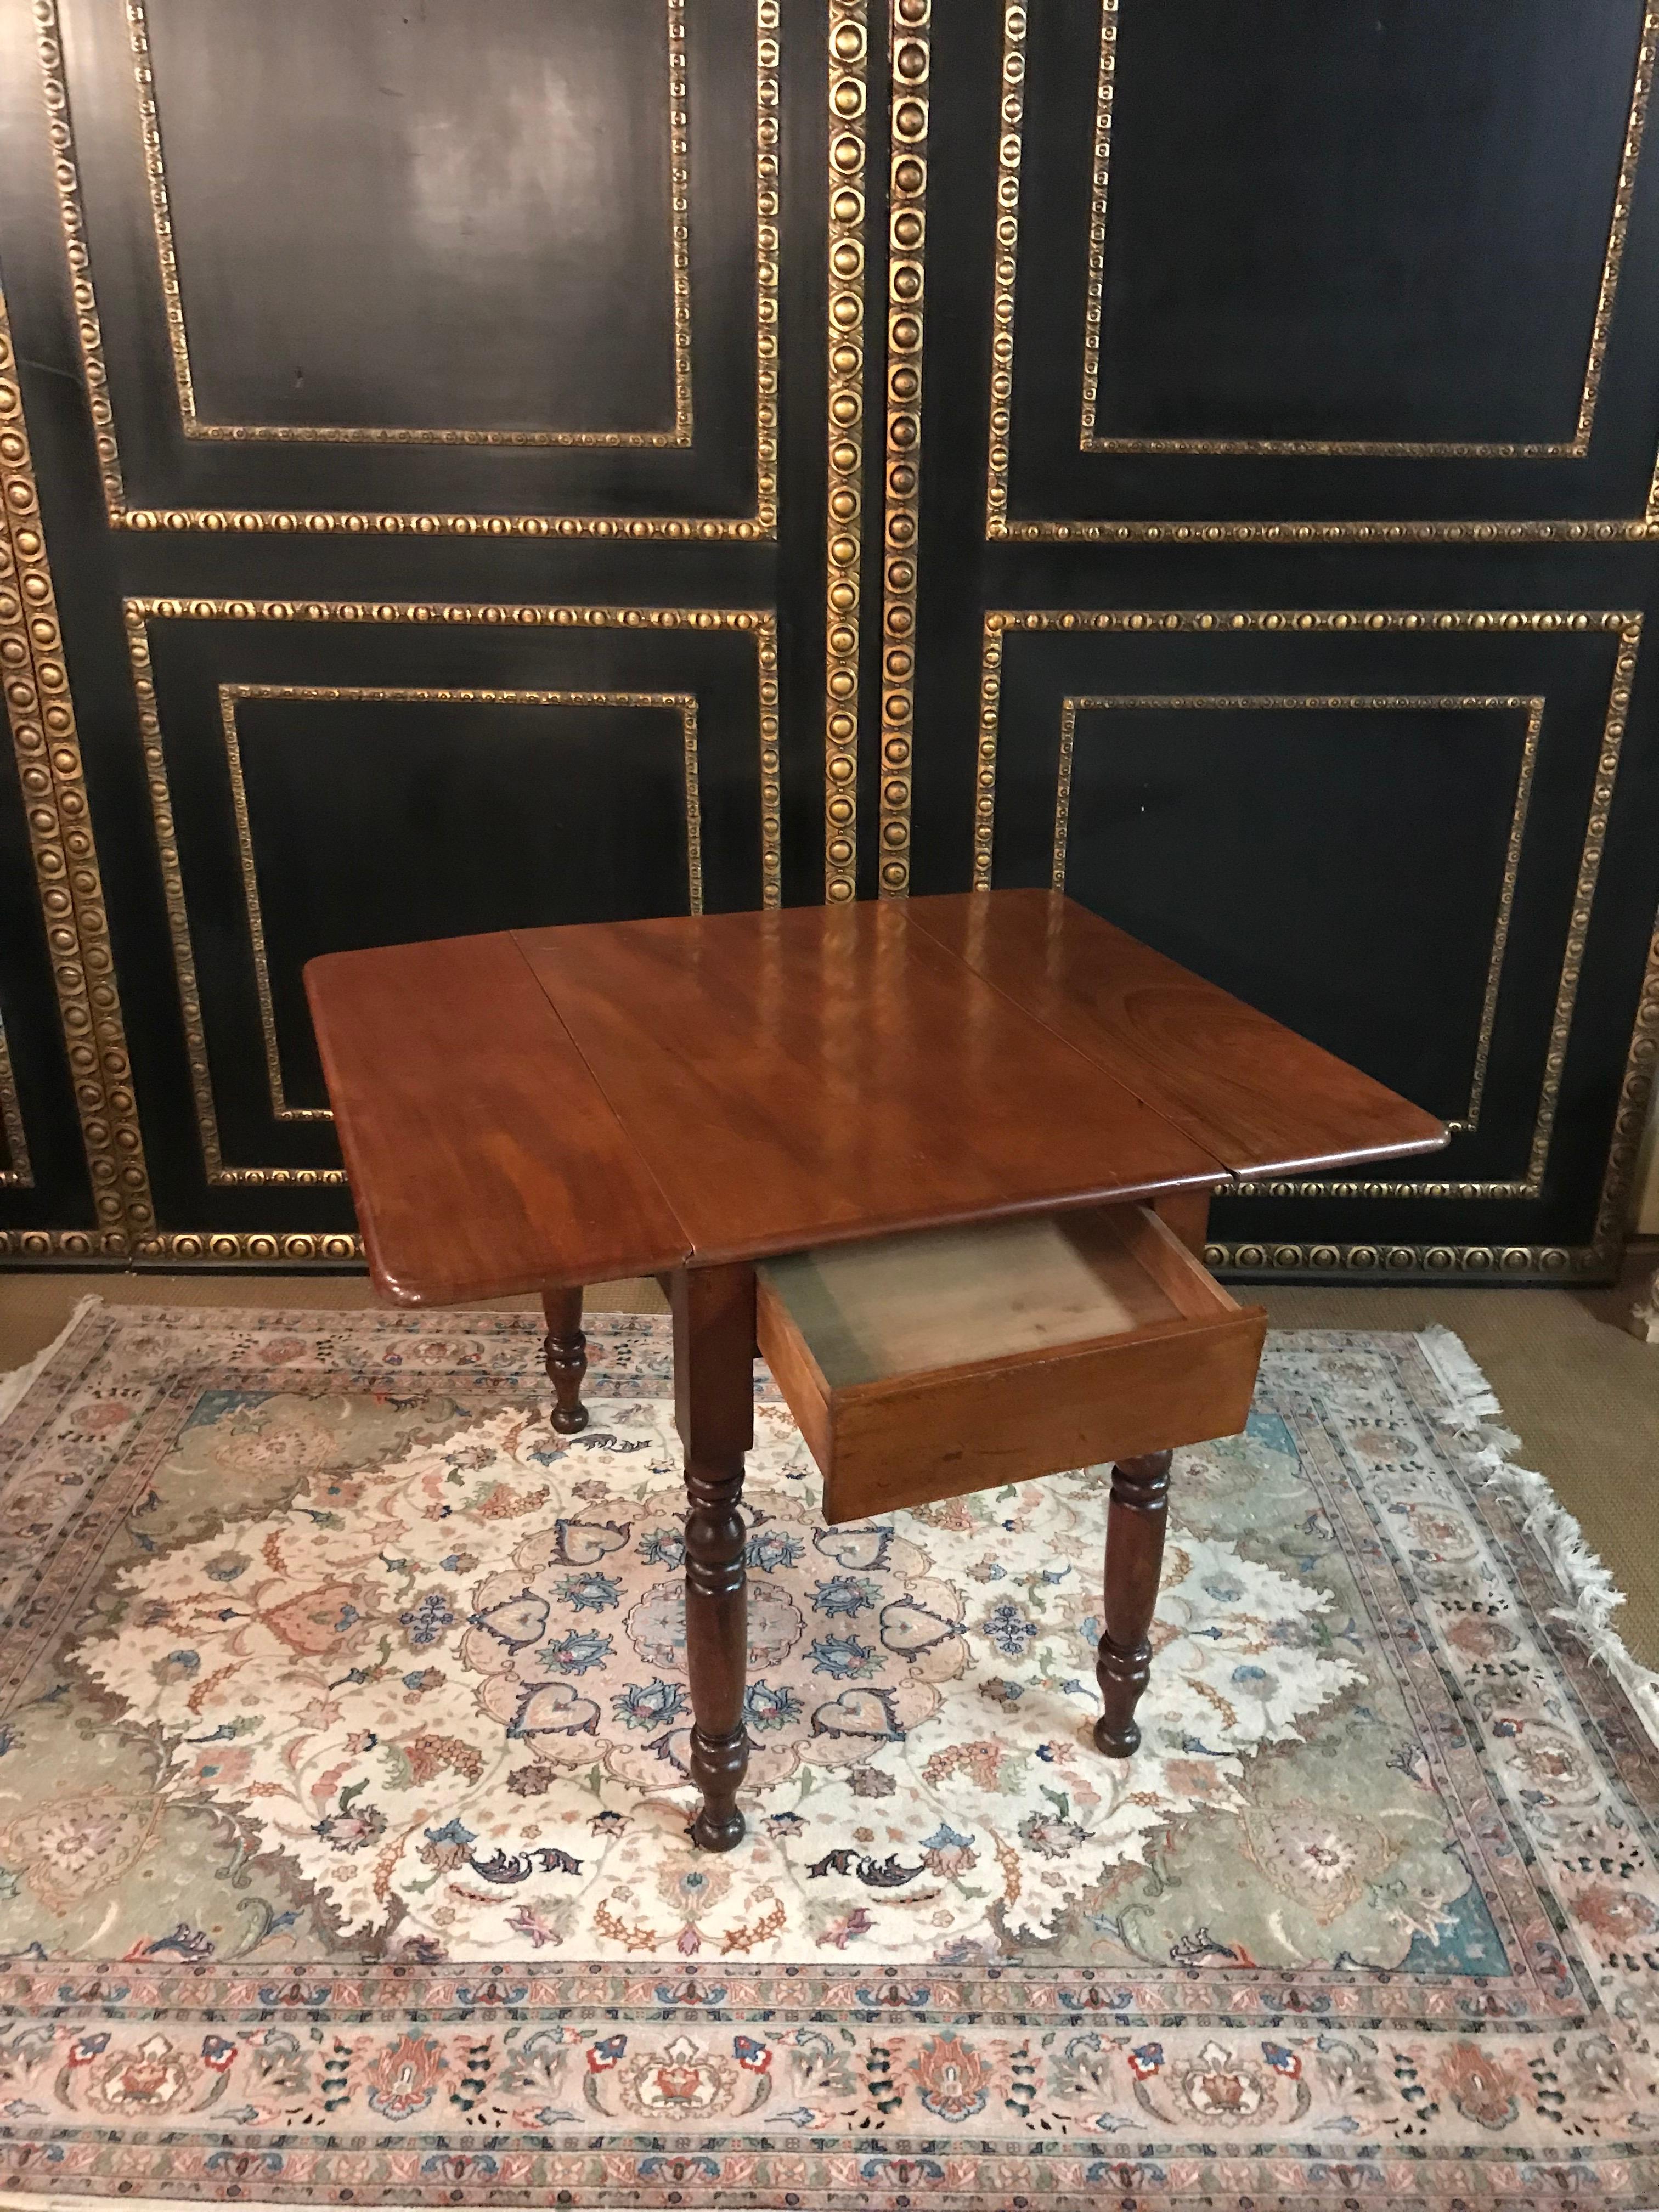 English 19th Century Antique Victorian Drop-Leaf Table, Solid Mahogany Wood